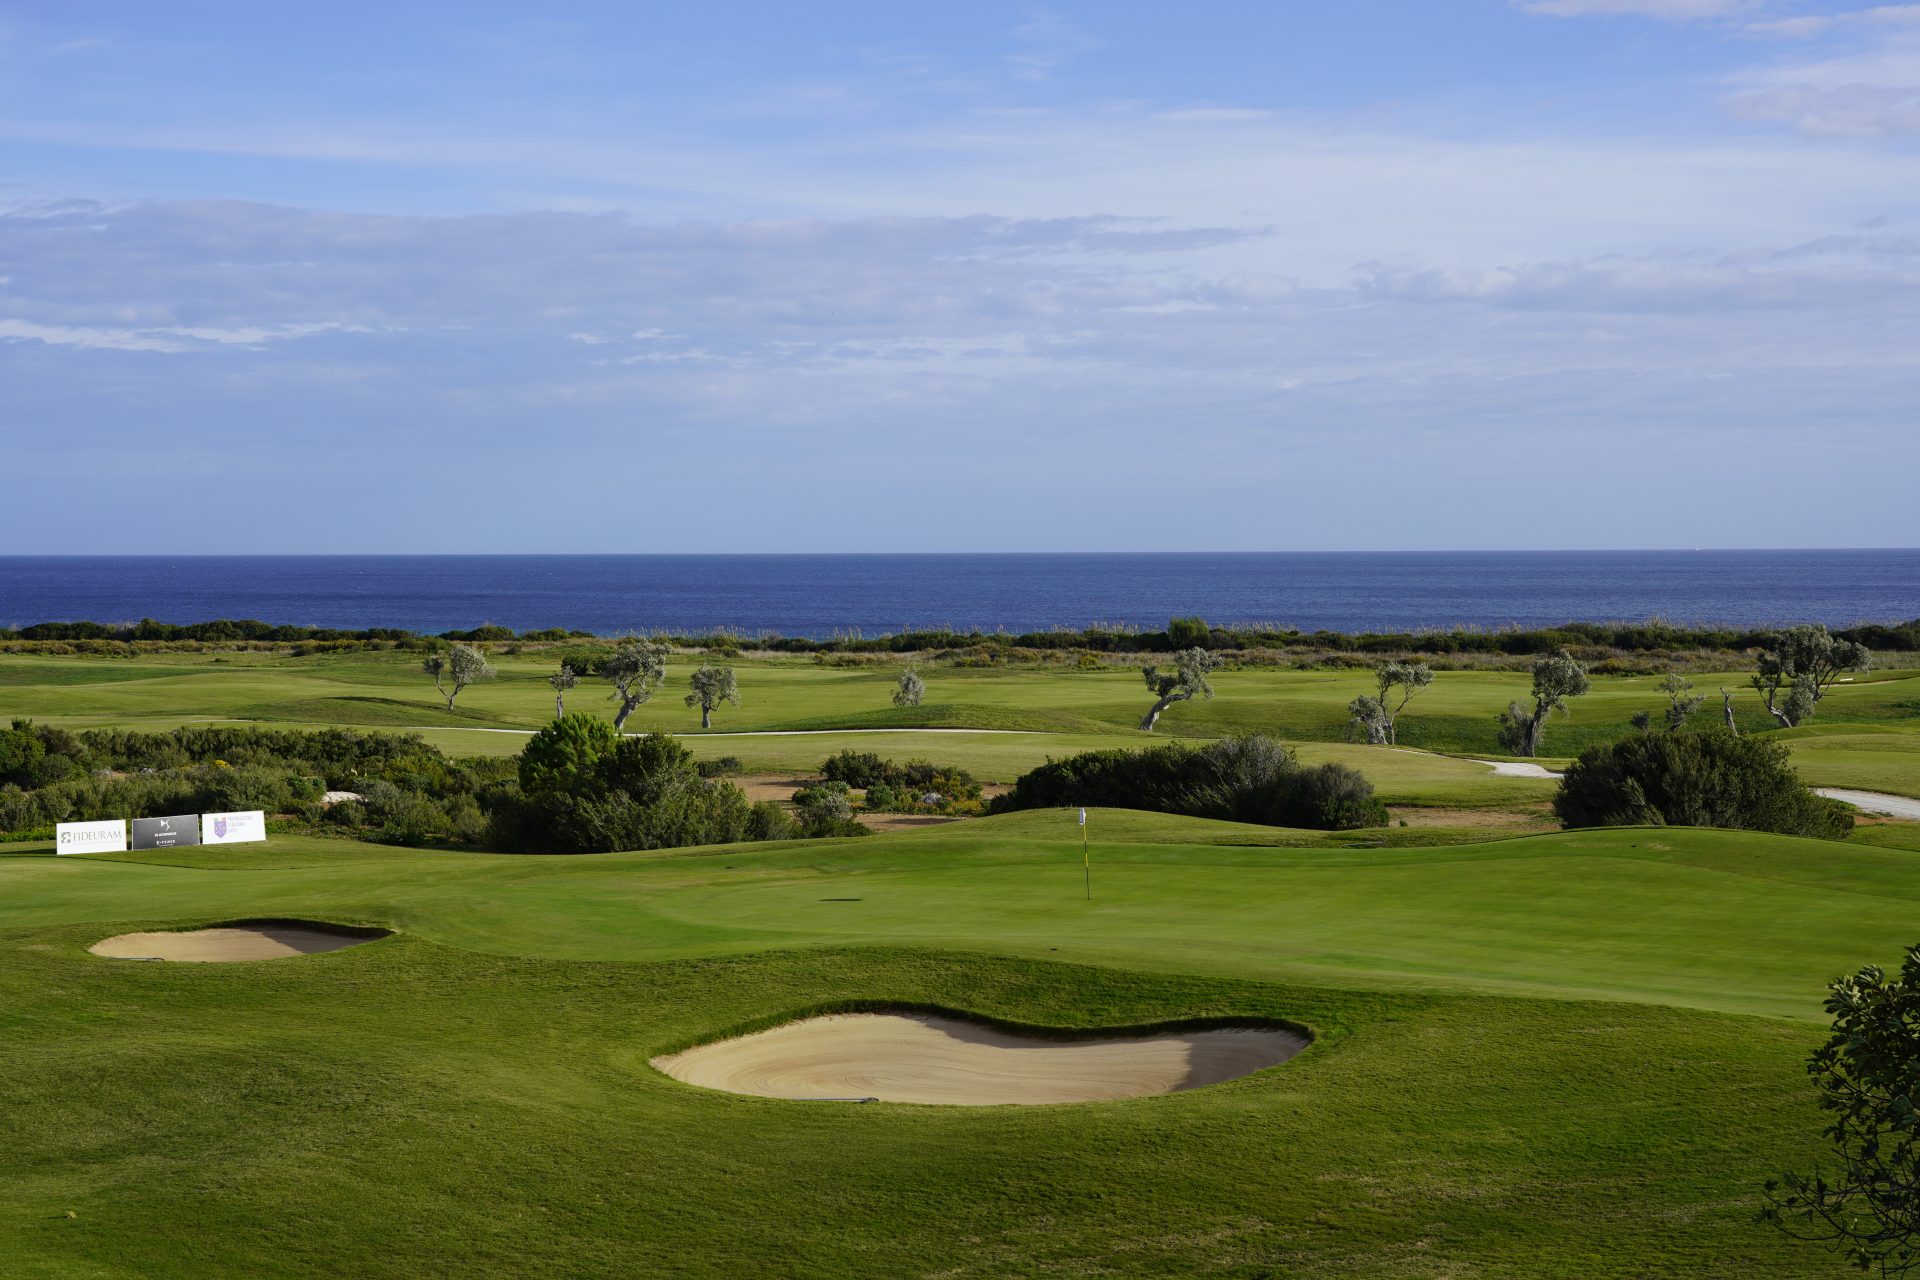 Golf course and view of the sea